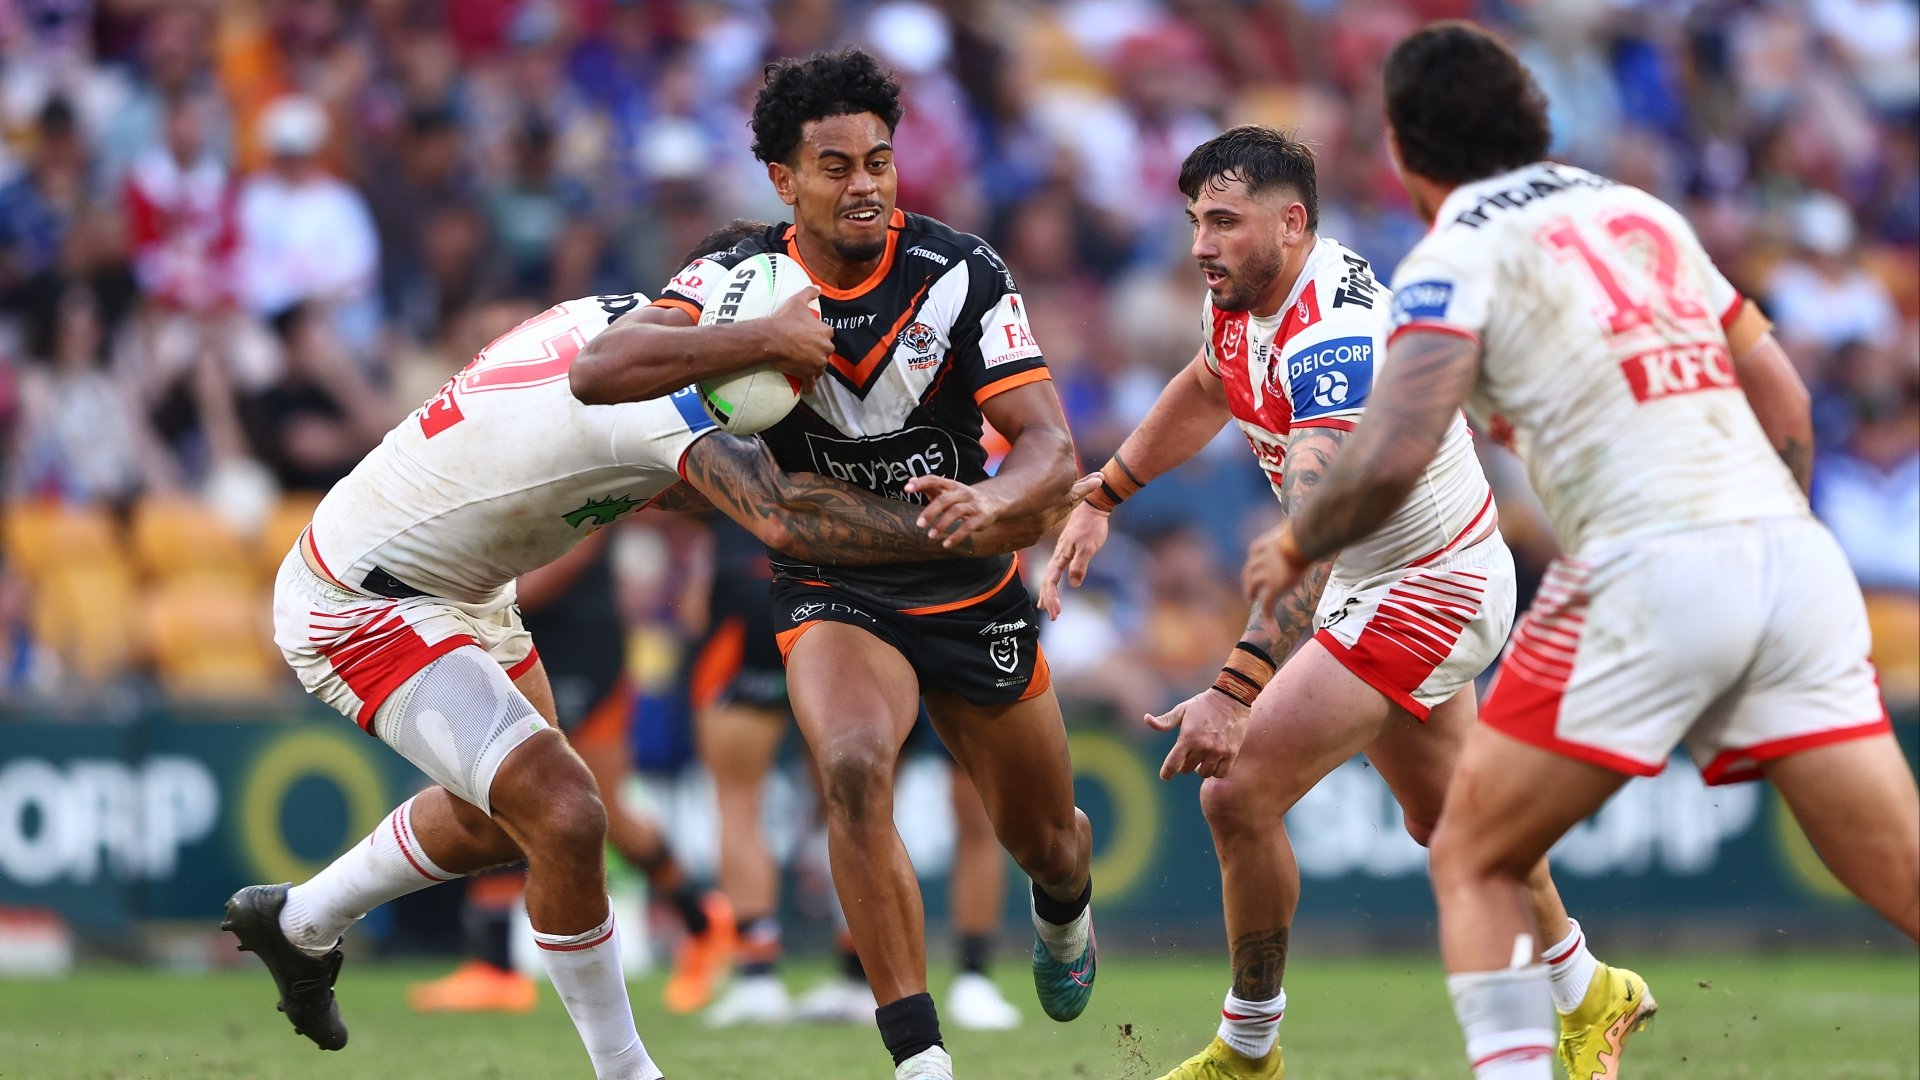 St George Illawarra Dragons vs Wests Tigers Tips & Preview - Battle of the Wooden Spoon